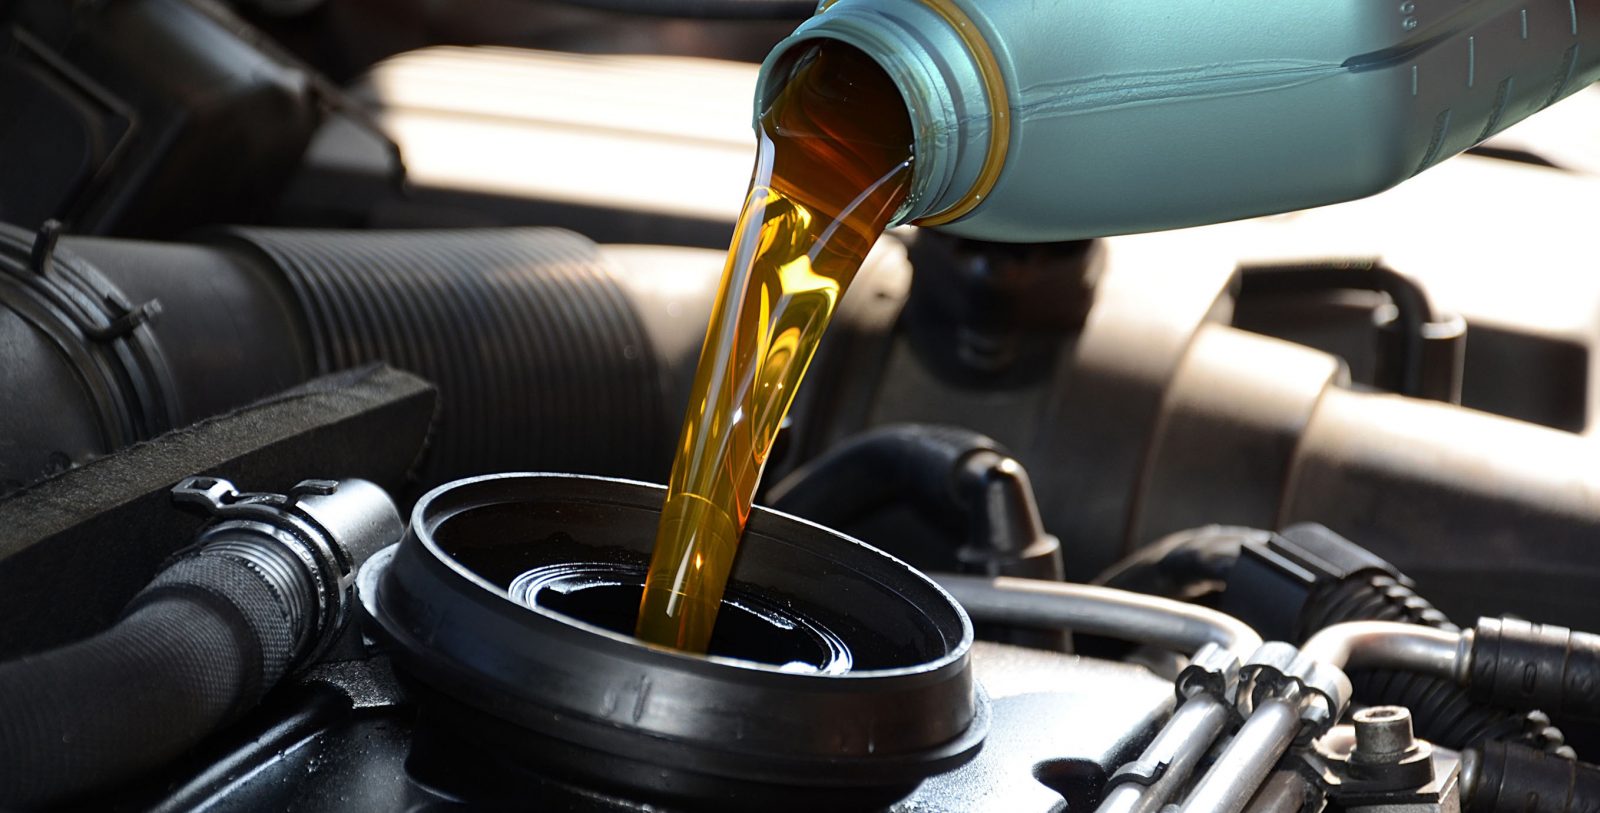 List of All Engine oil prices in Pakistan 2018-19 July Onward